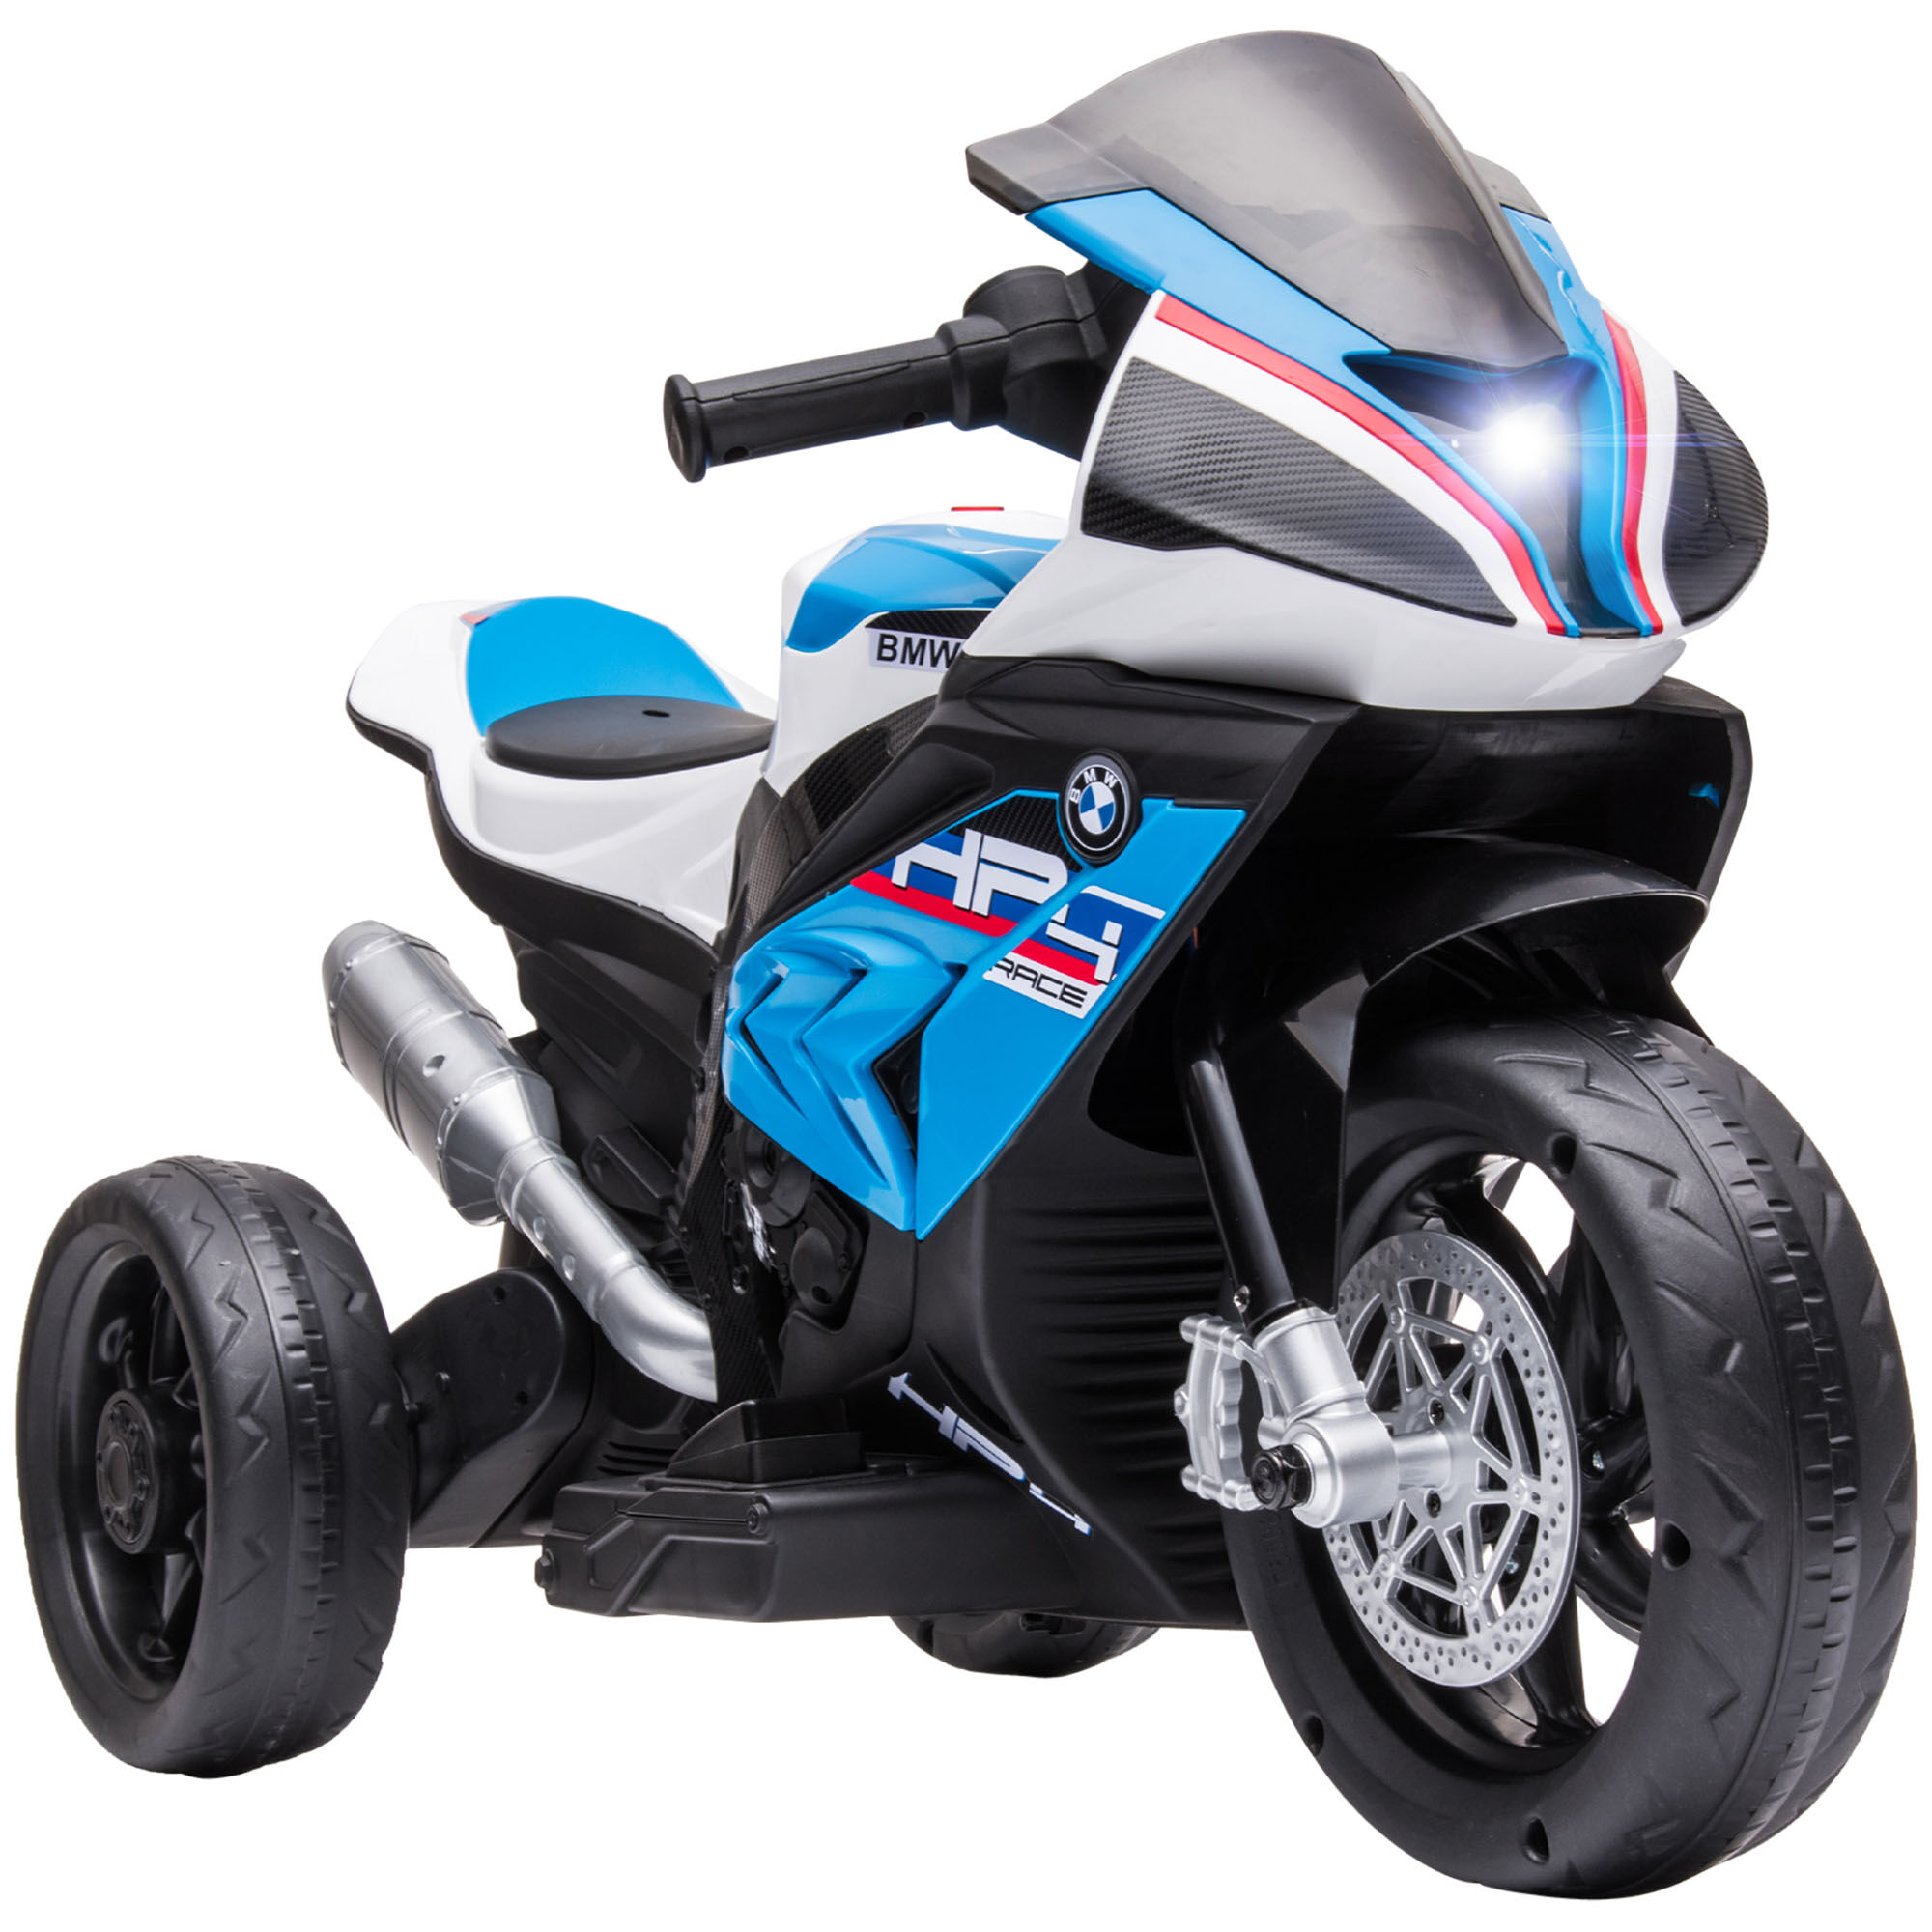 Aosom BMW Licensed Kids Motorcycle, Electric 3-Wheel Ride-On Dirtbike, USB/AUX Music Play, Headlight, Blue for Toddlers   Aosom.com